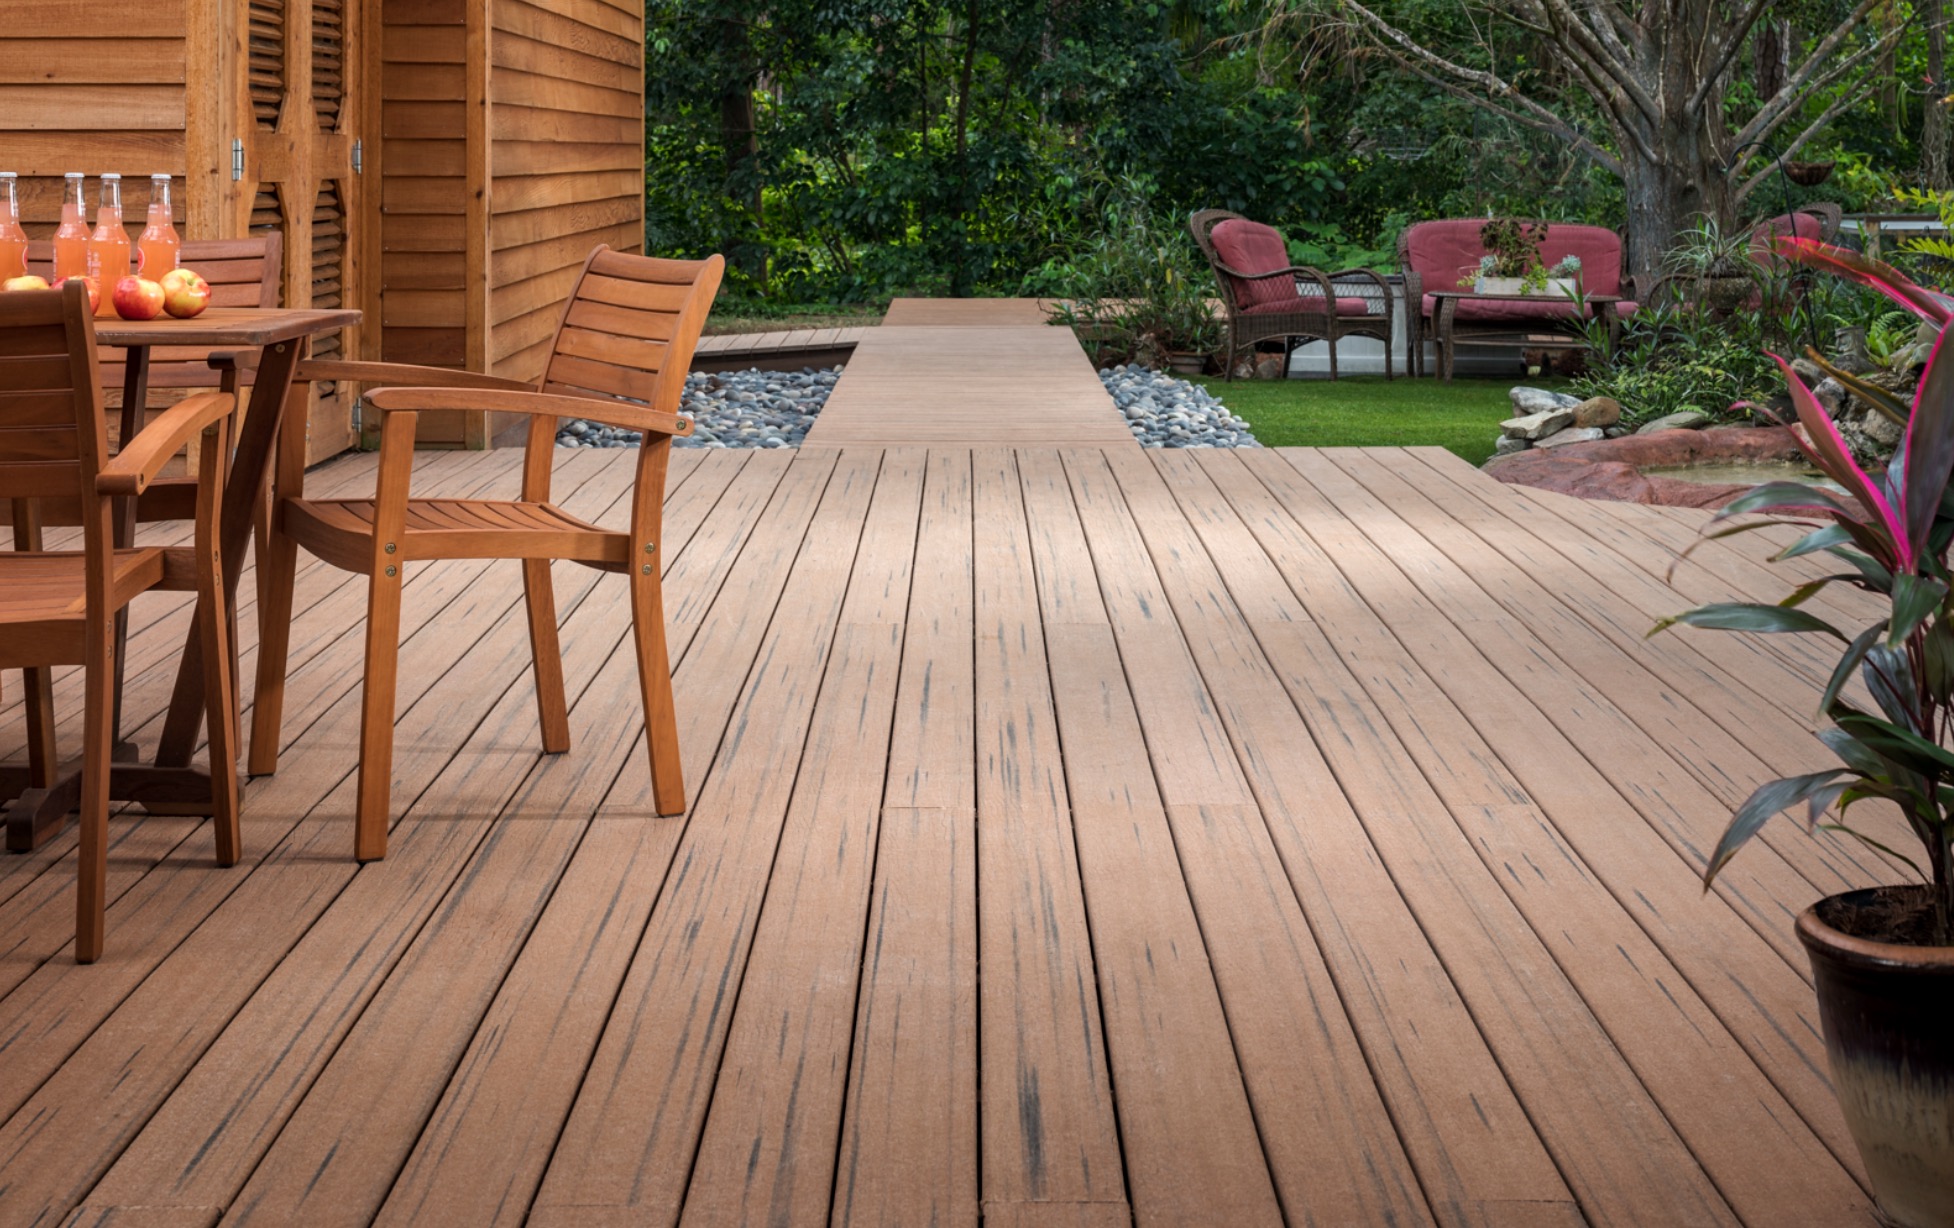 Best Deck Material Options for 2022